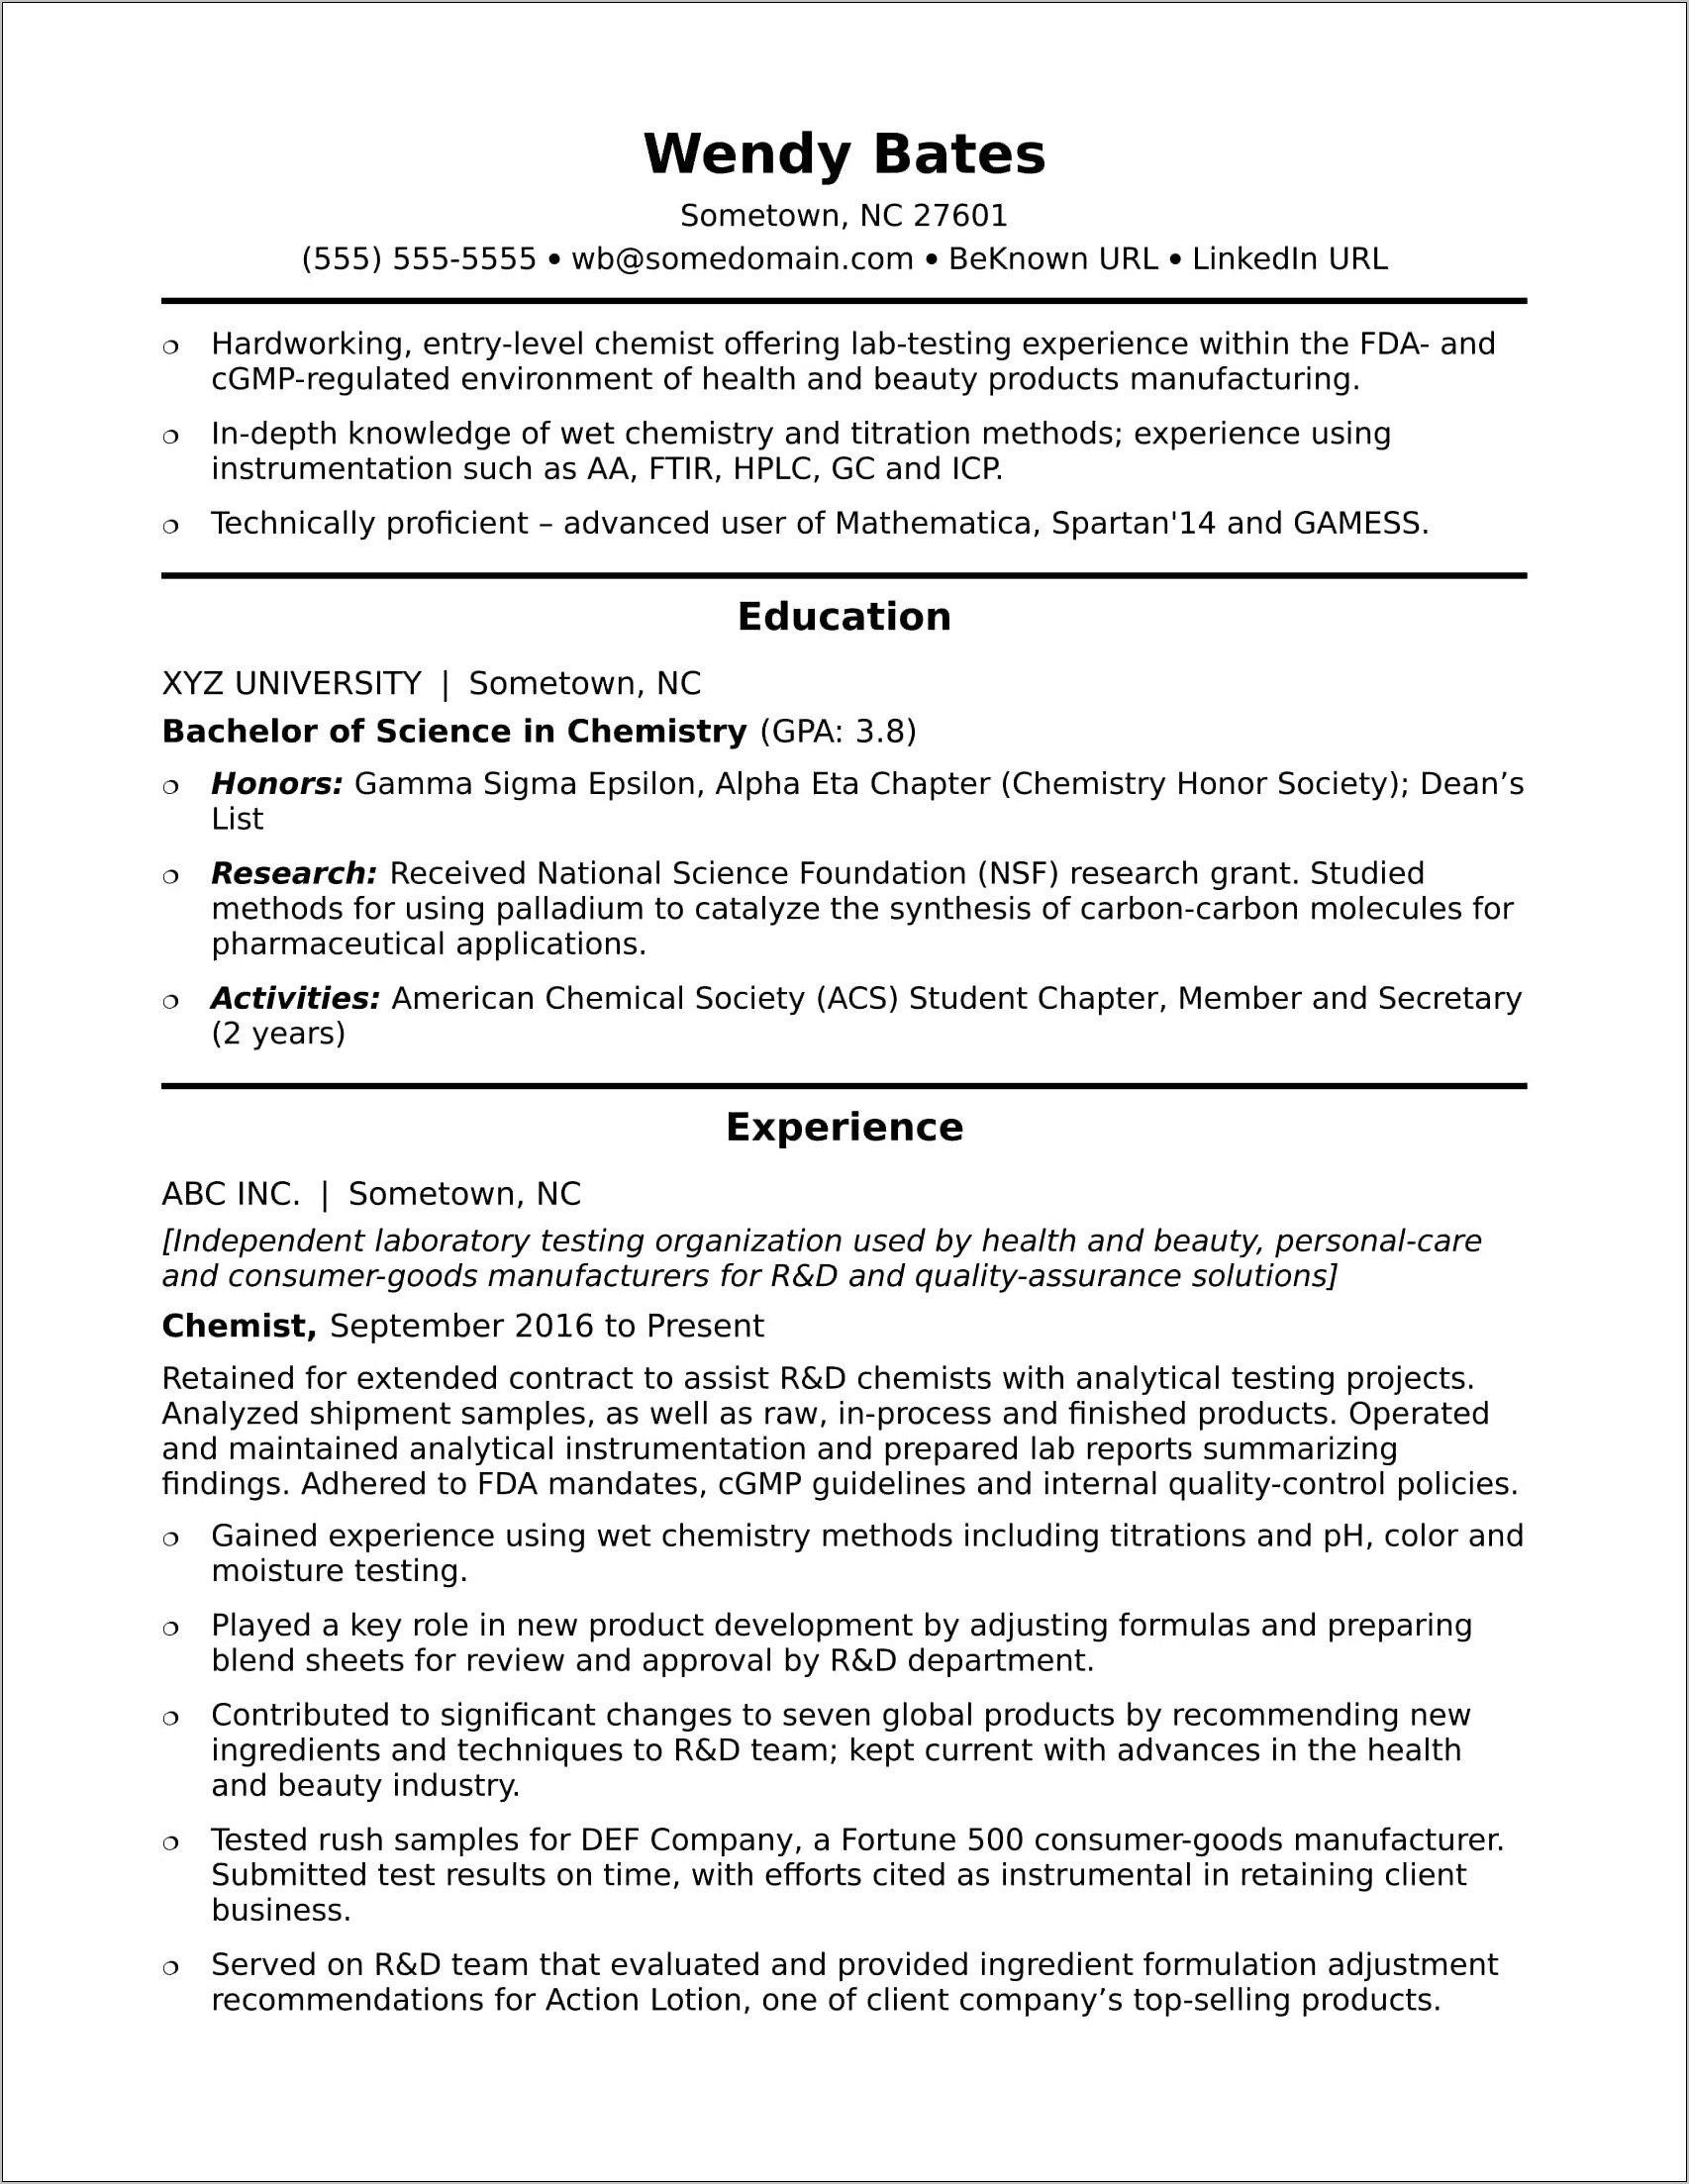 Perfect Wendy's Professional Experience Resume